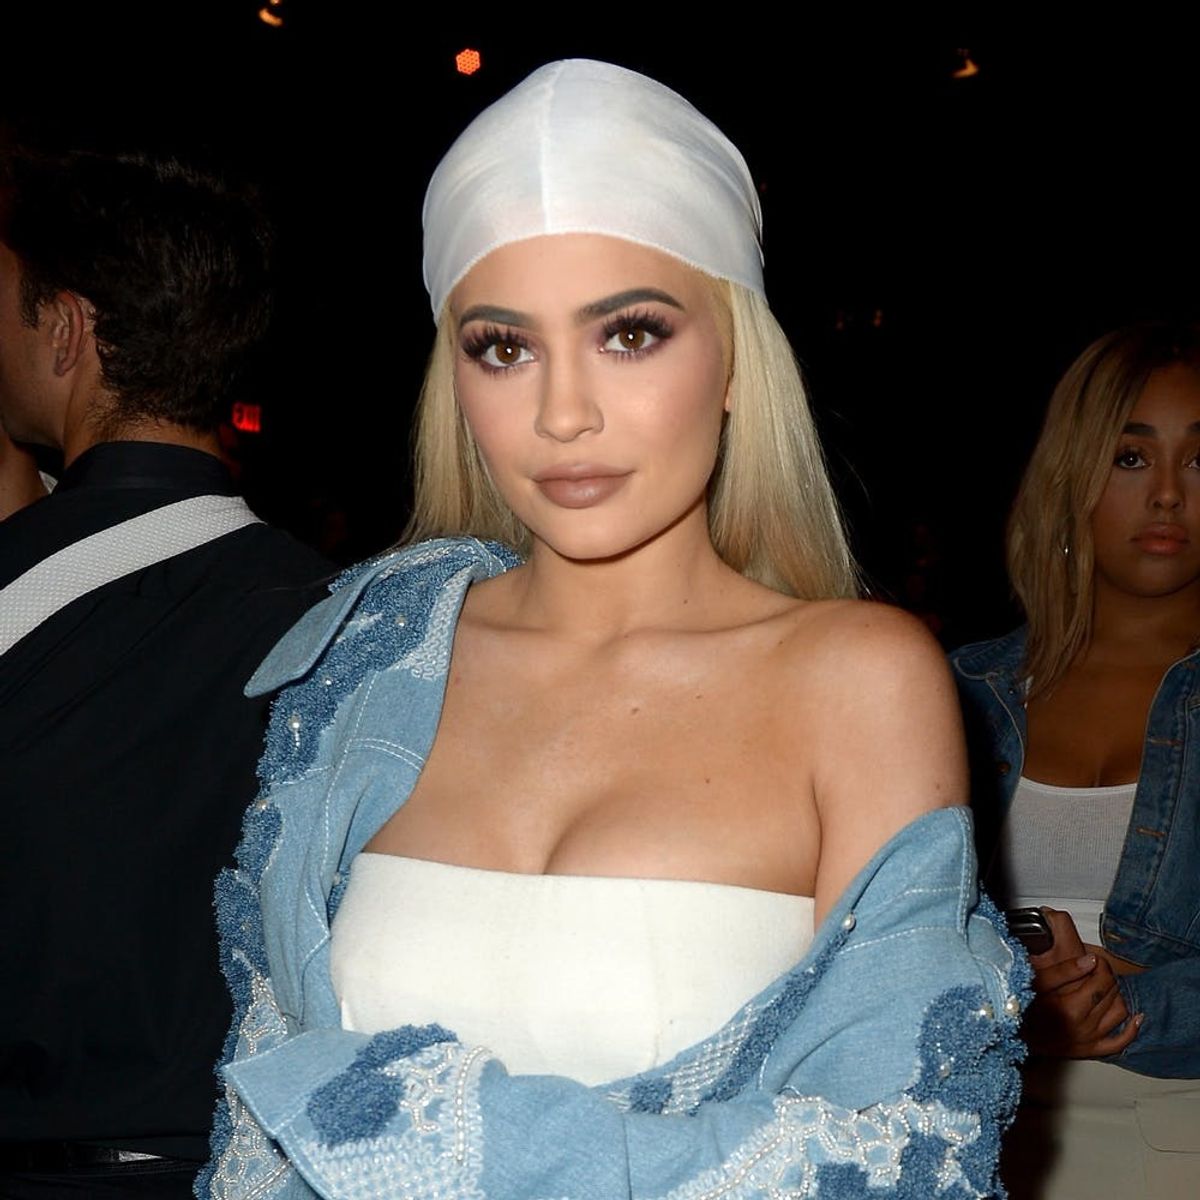 Kylie Jenner Just Showed Up to Christina Aguilera’s Birthday Party As Xtina and It Was EPIC